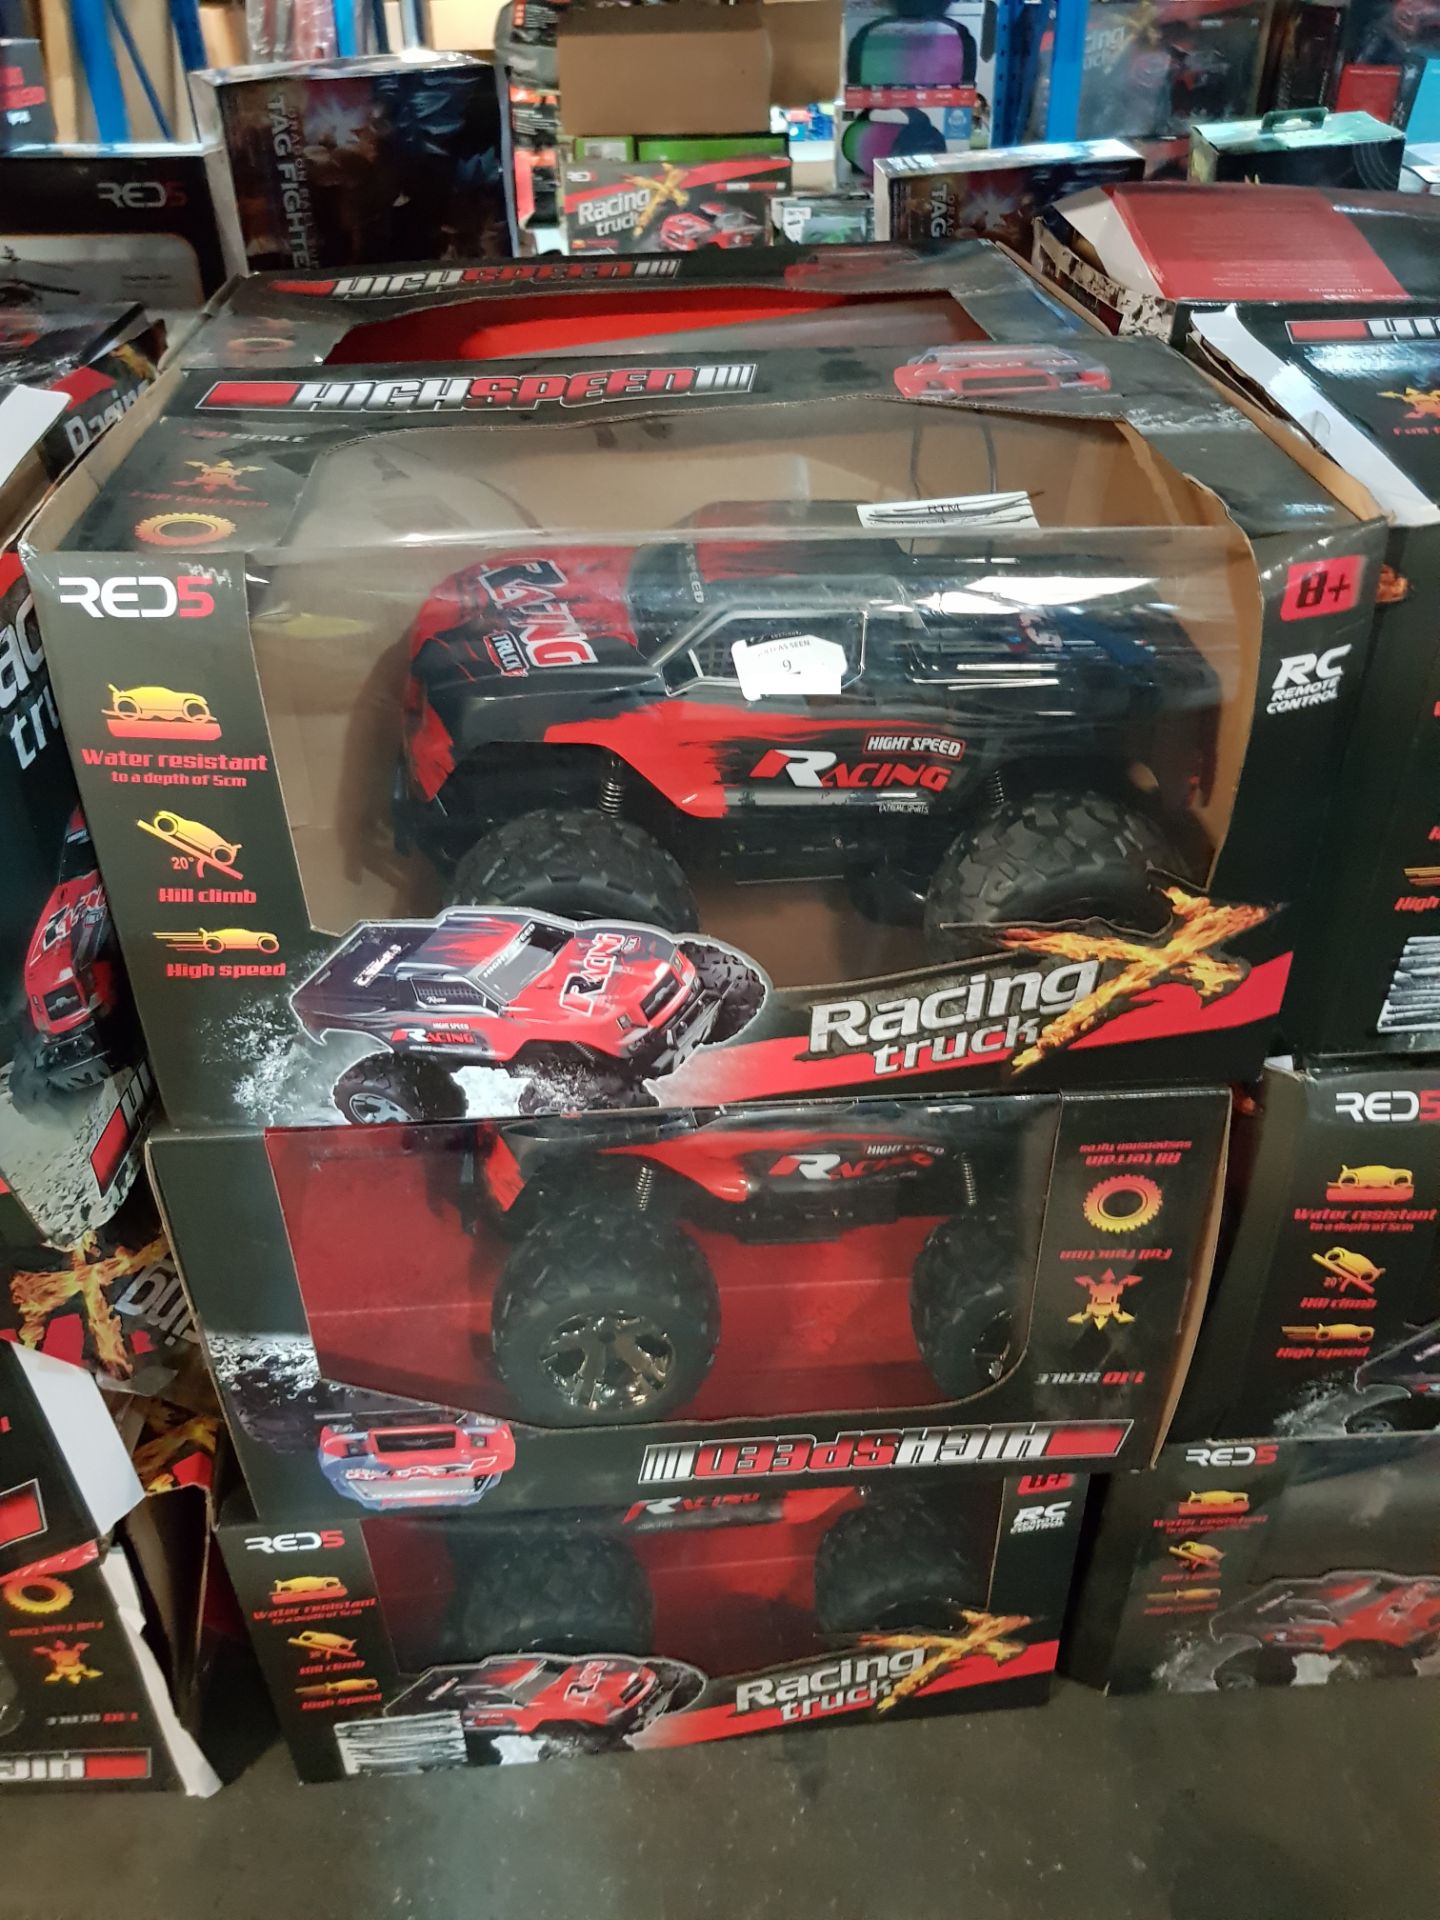 6 X Red5 High Speed RC Racing Truck